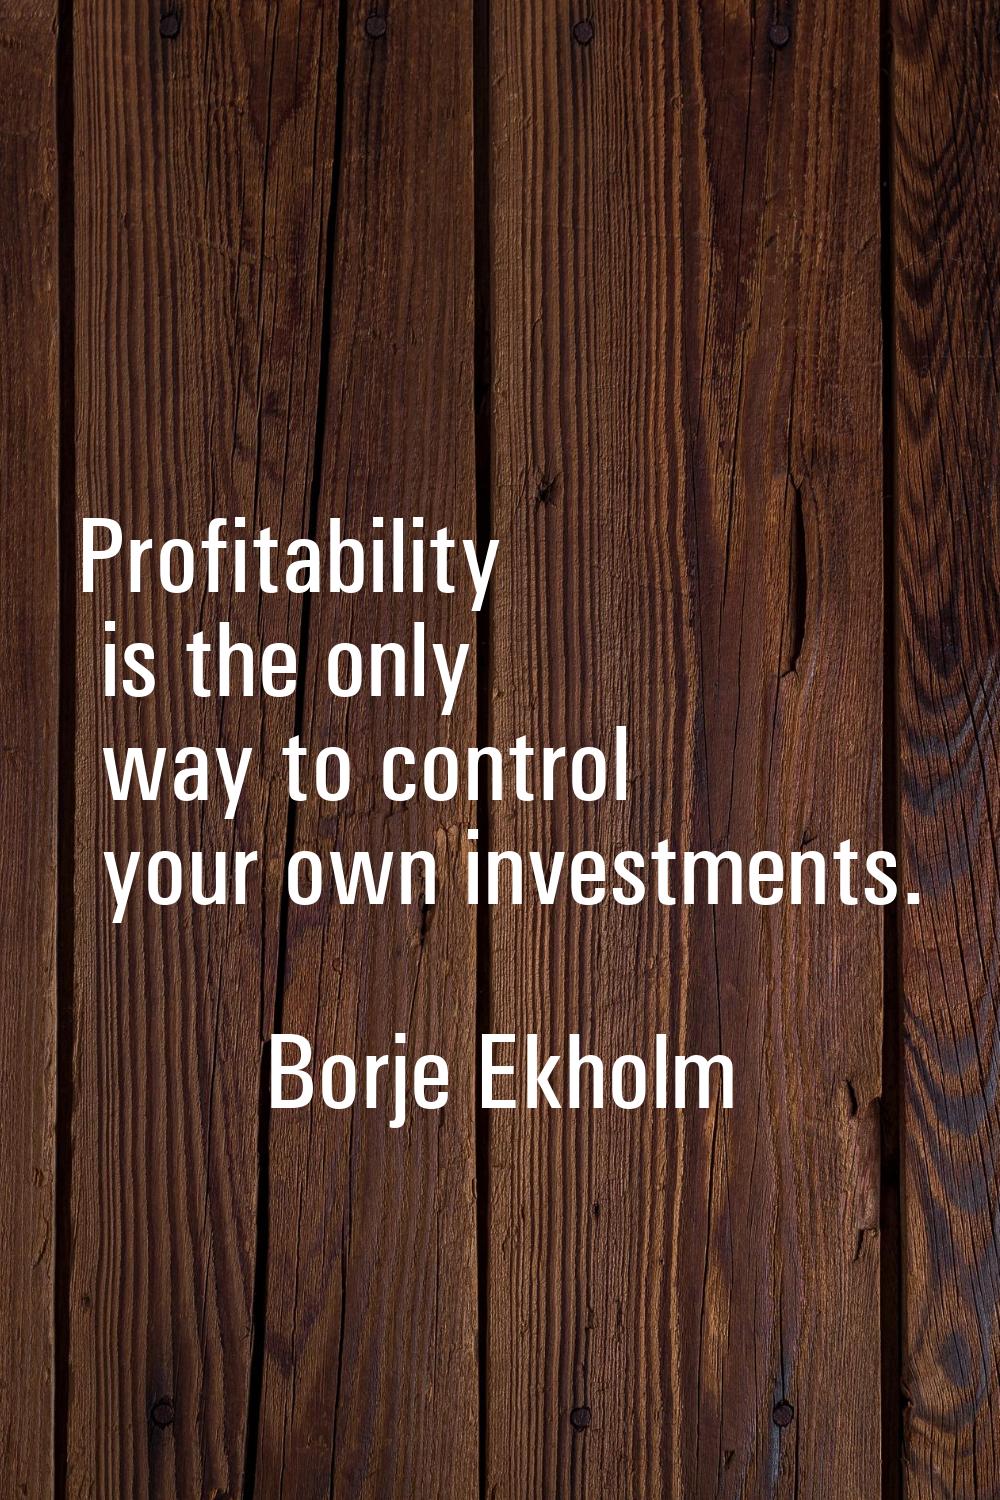 Profitability is the only way to control your own investments.